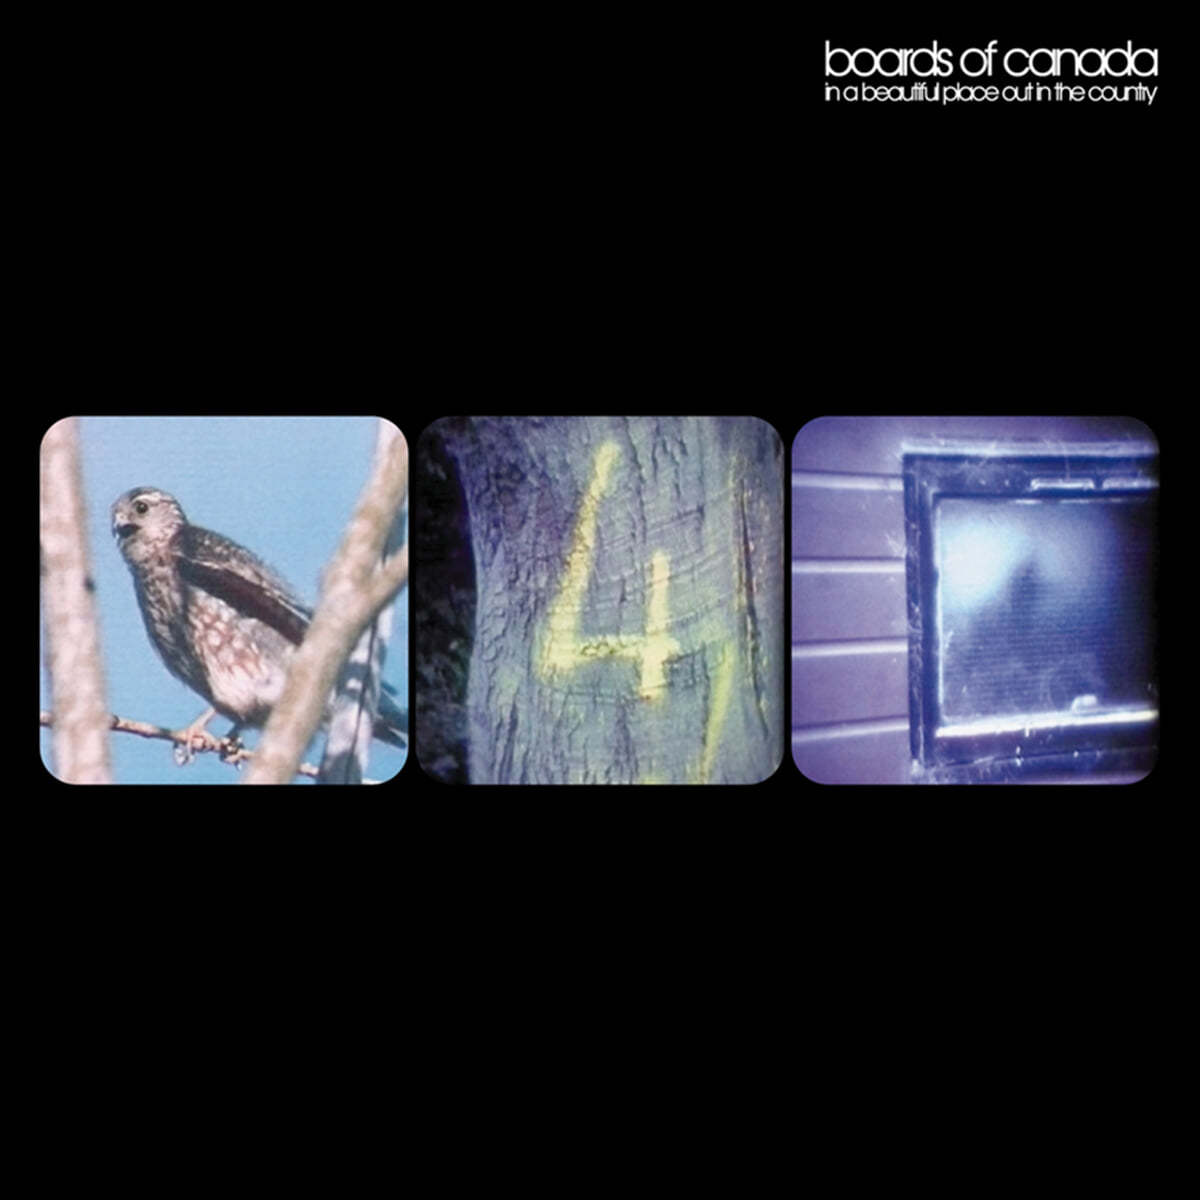 Boards of Canada (보즈 오브 캐나다) - In A Beautiful Place Out In The Country (EP) [LP] 